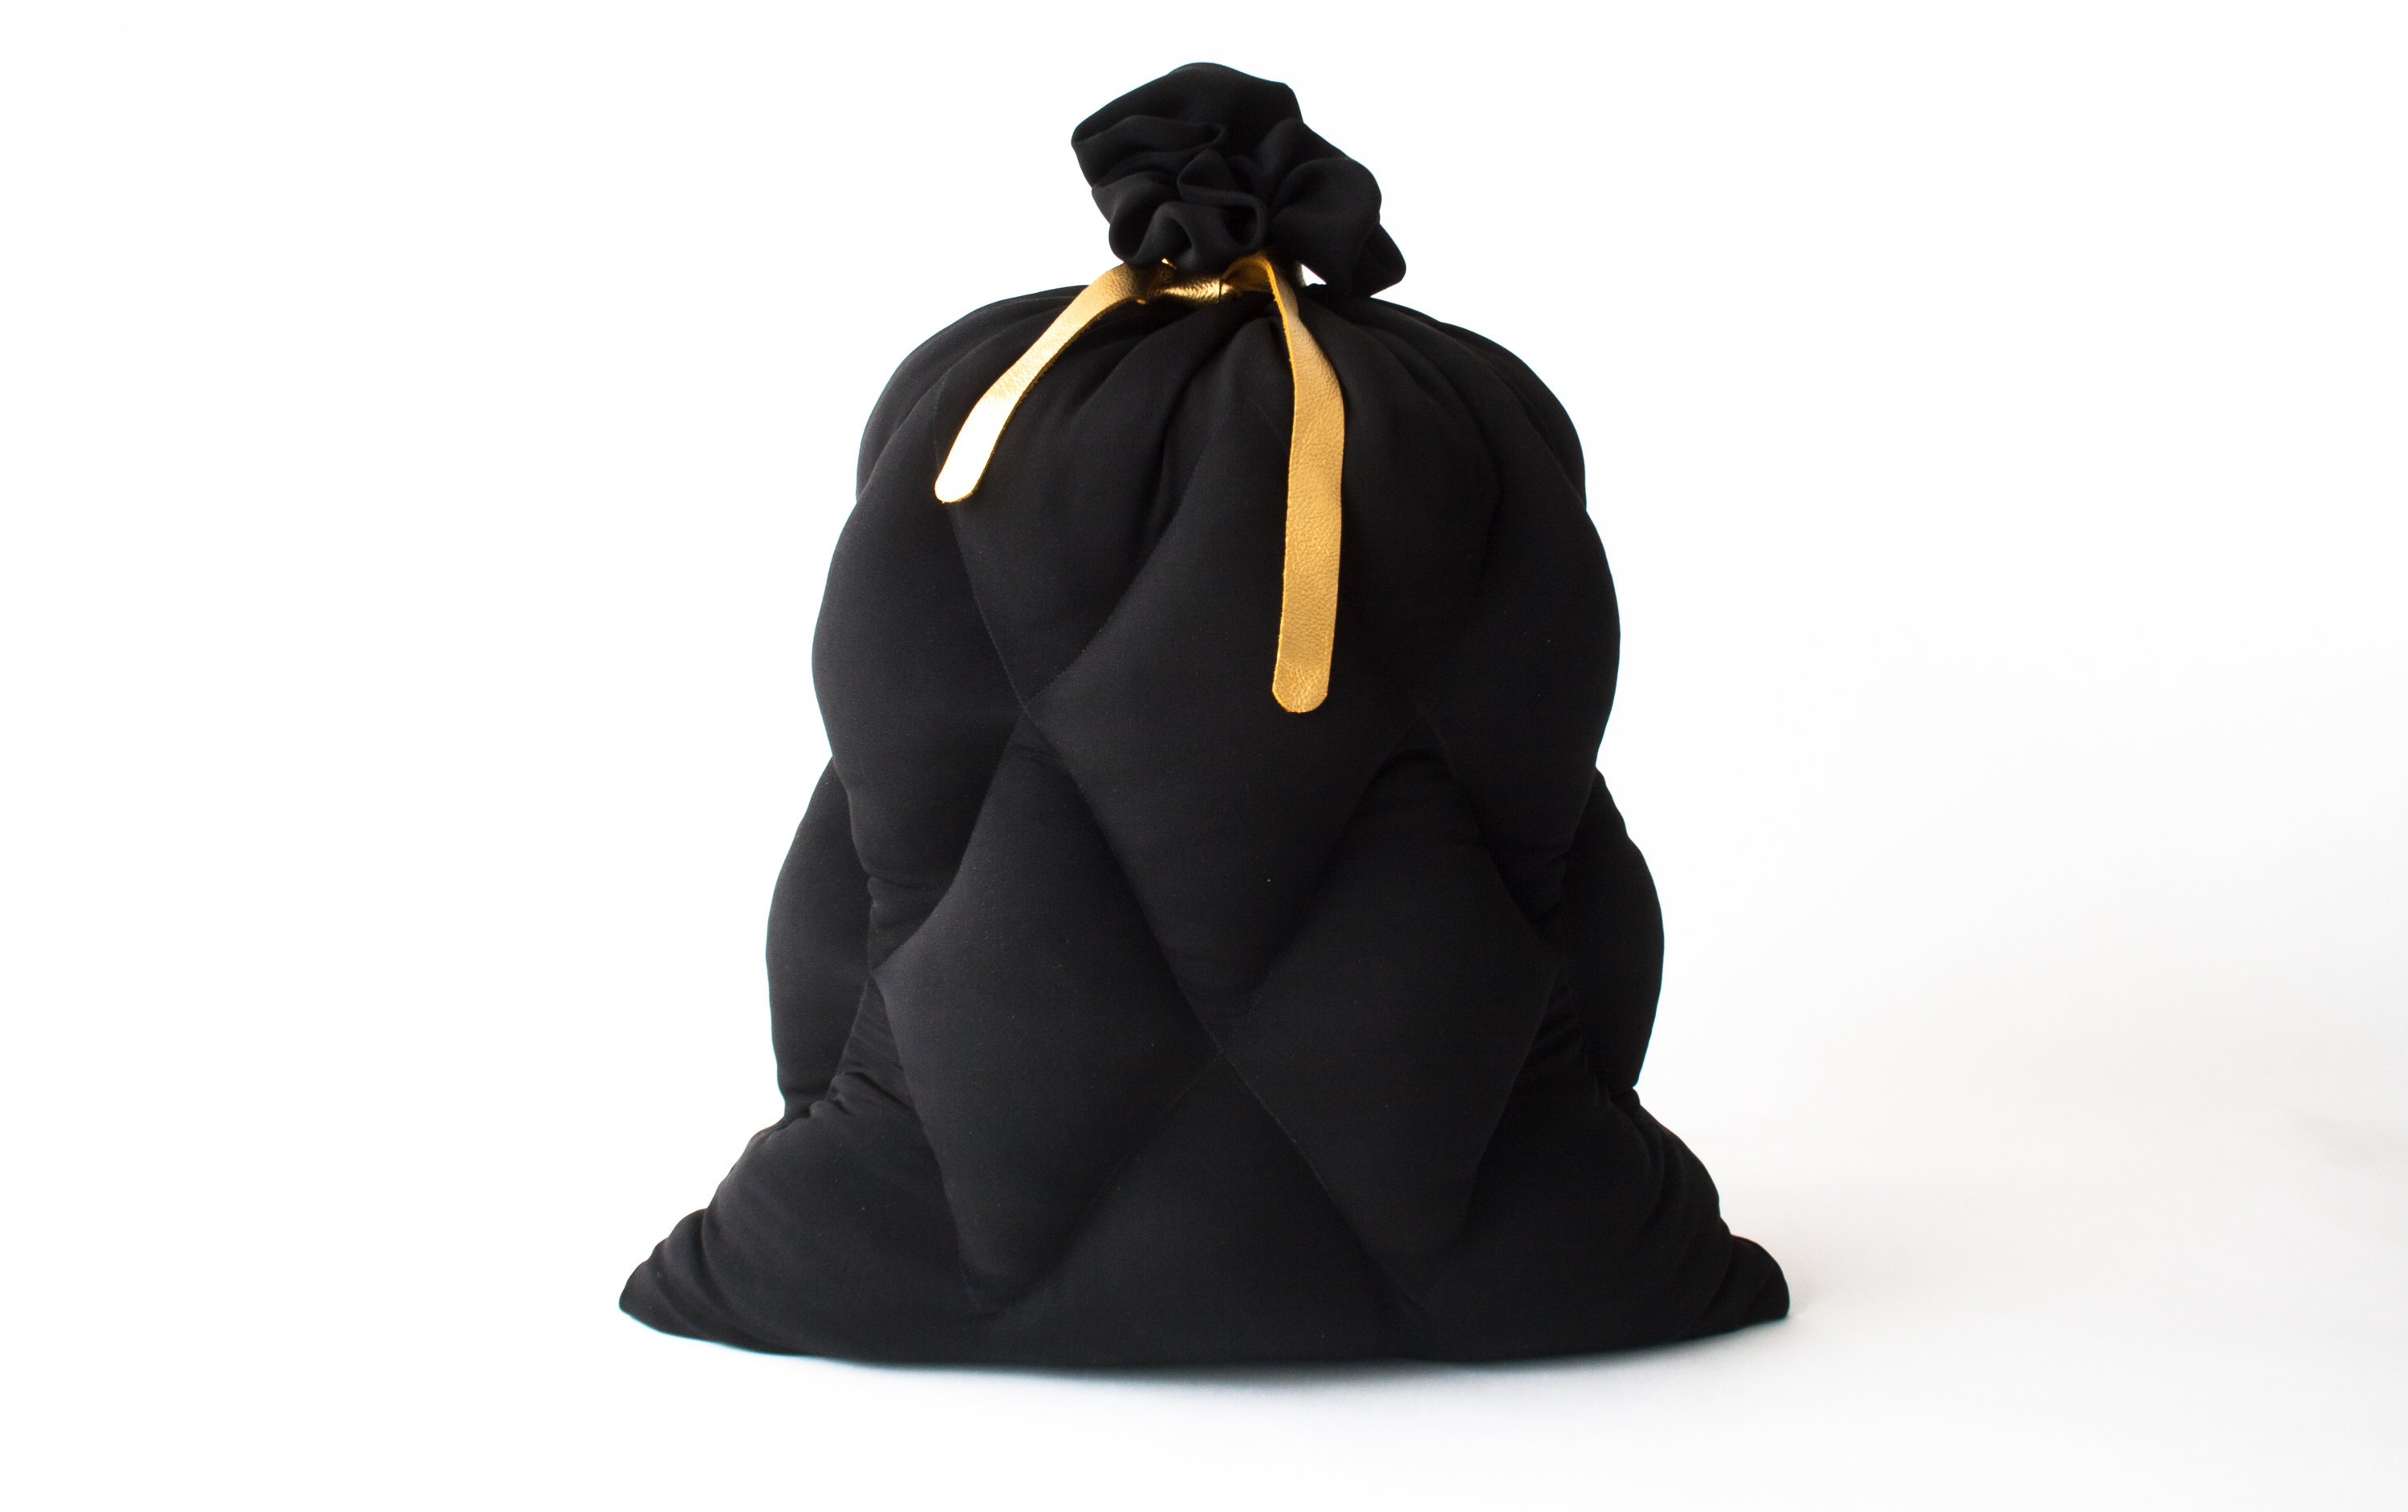 Limited Garbage, a limited edition silk pillow in the shape of a garbage bag, designed by Jarle Veldman